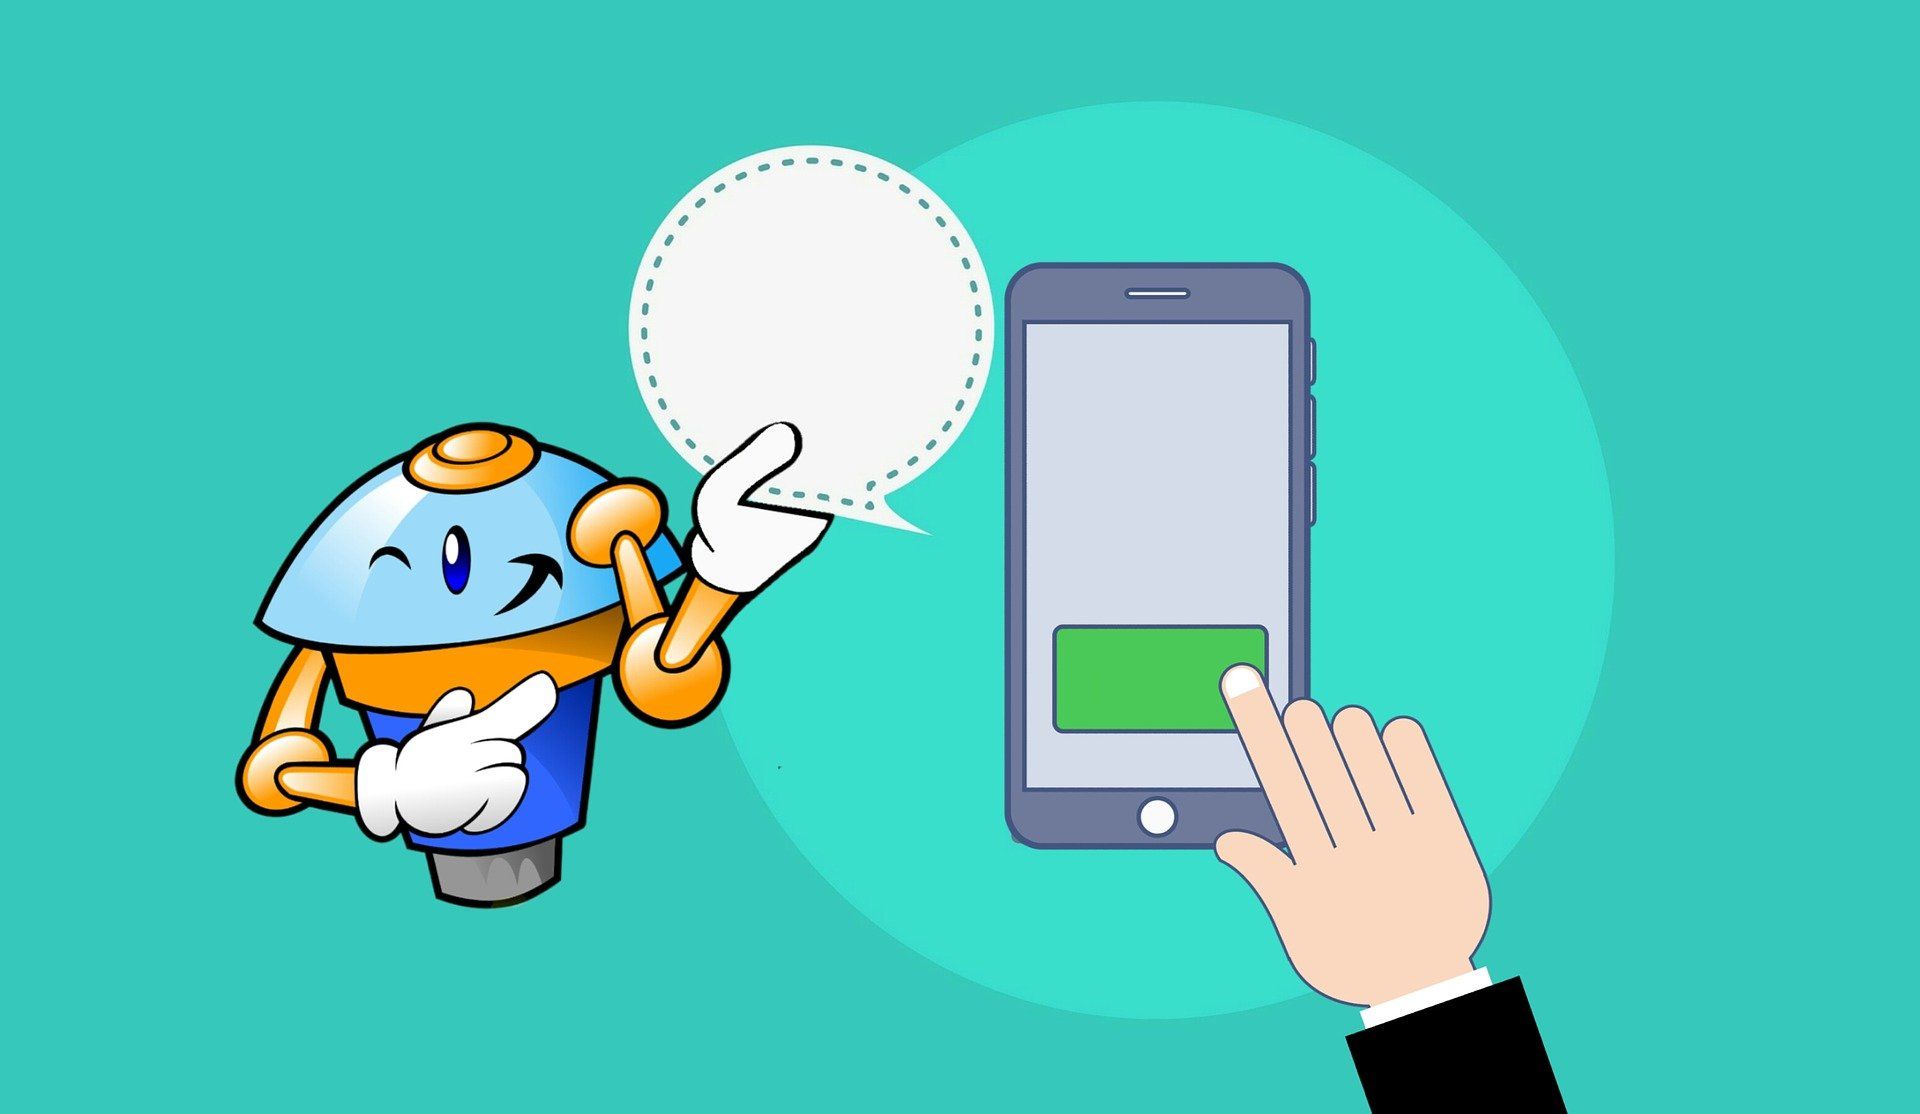 The use of a chatbot in a mobile app increase sale